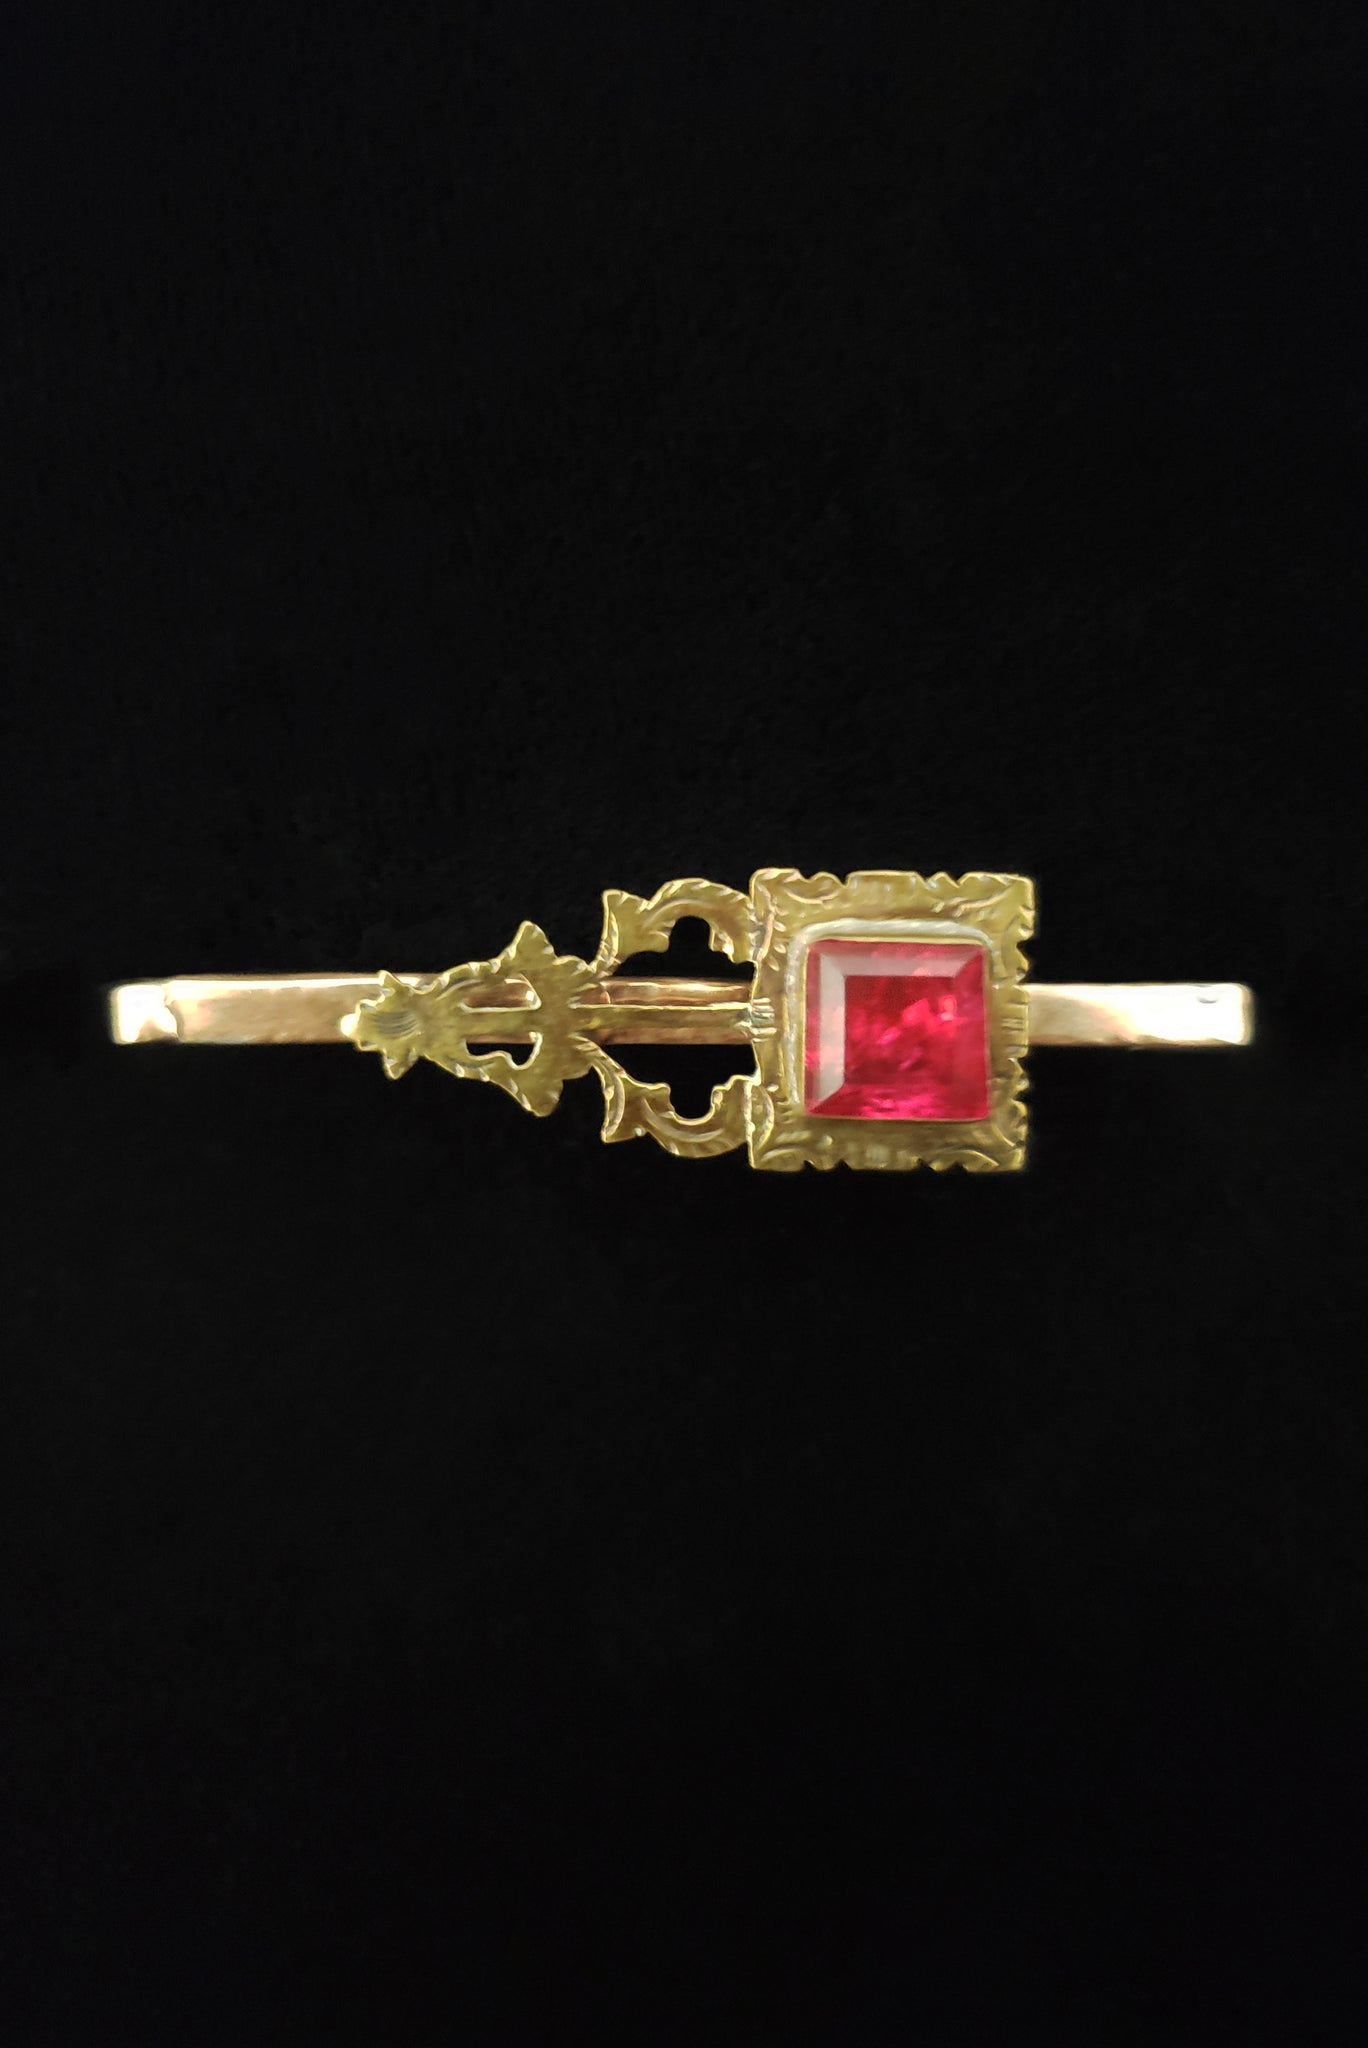 1920s Vintage Gold Tone Engraved Bar Brooch w/ Square Cut Red Ruby